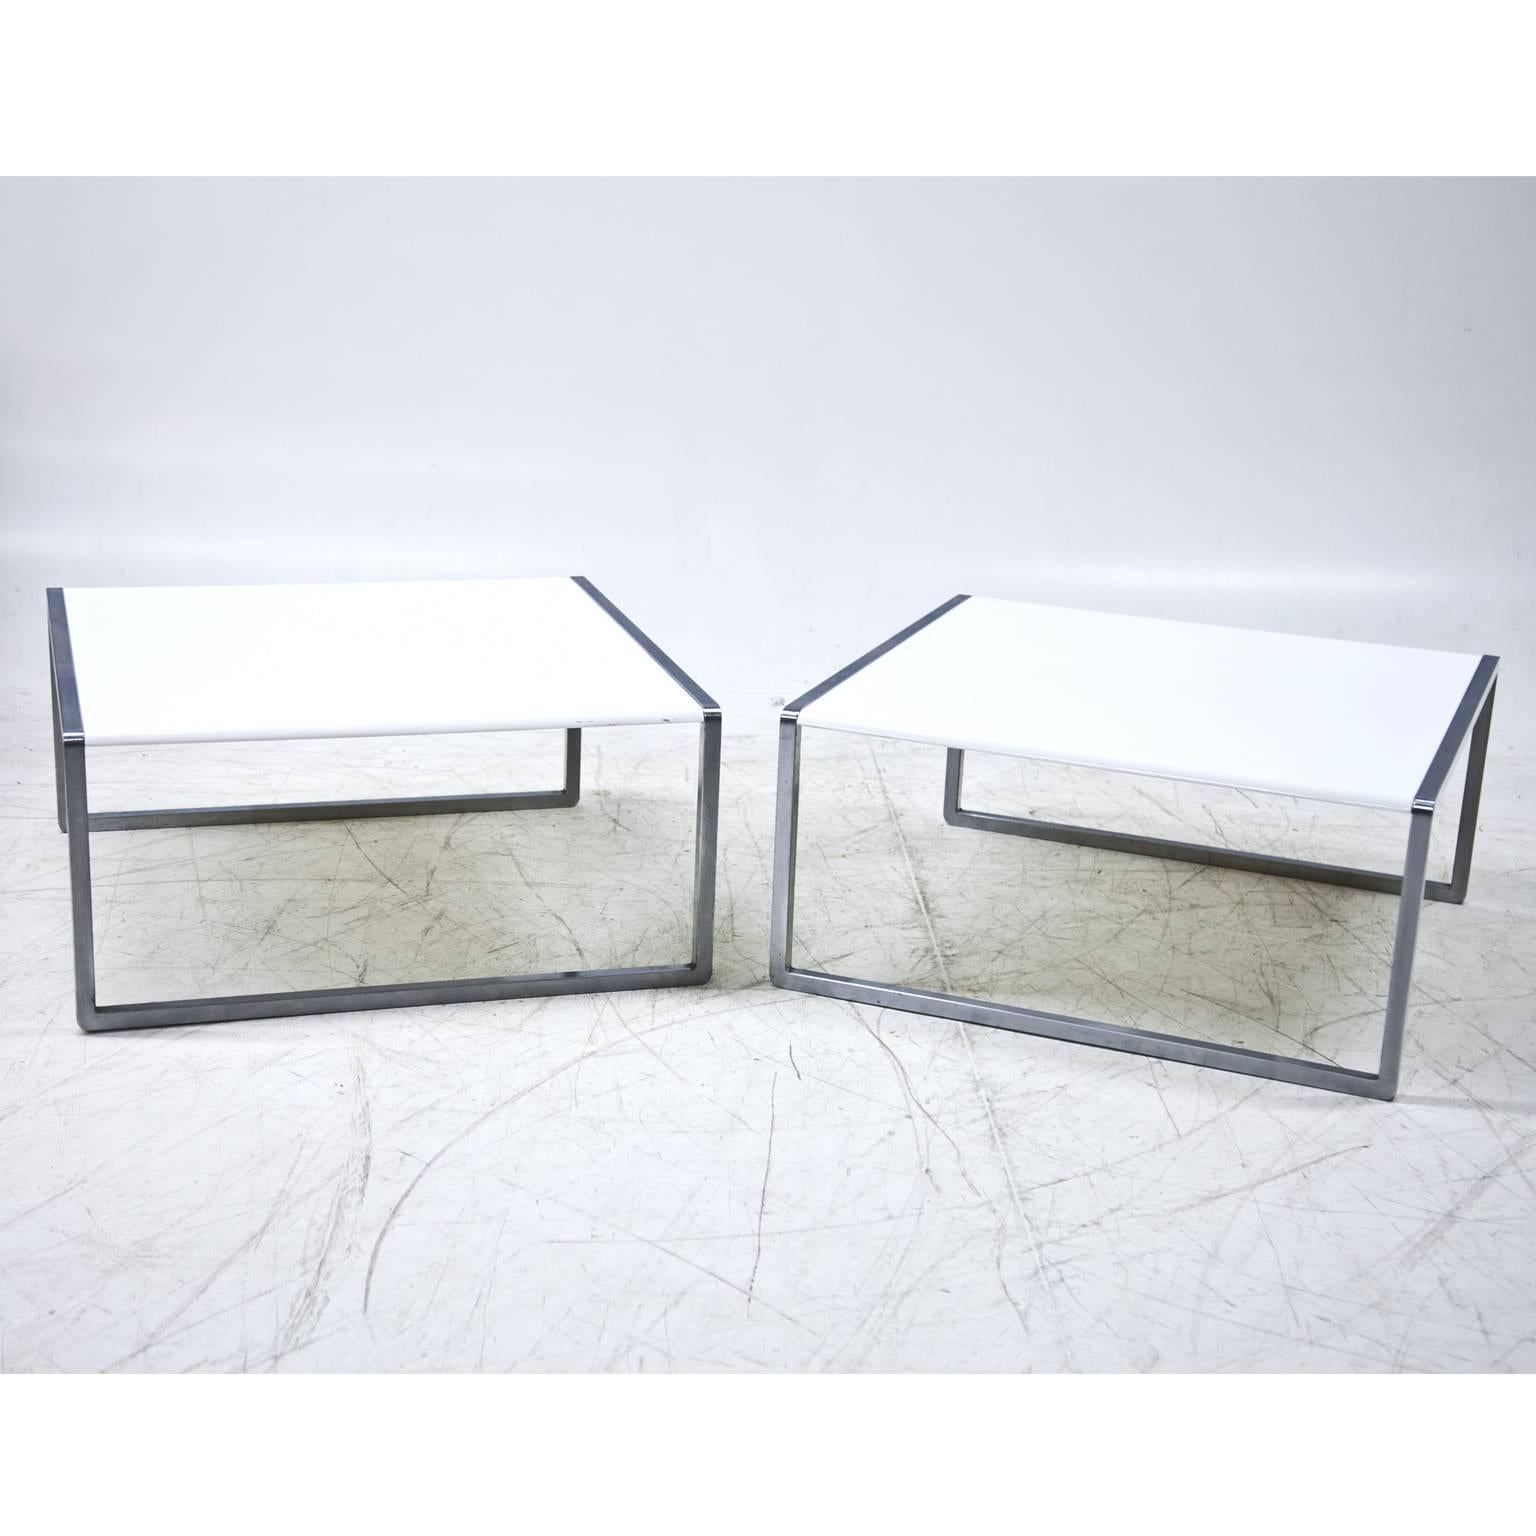 Pair of coffee tables with a white surface and metal feet.